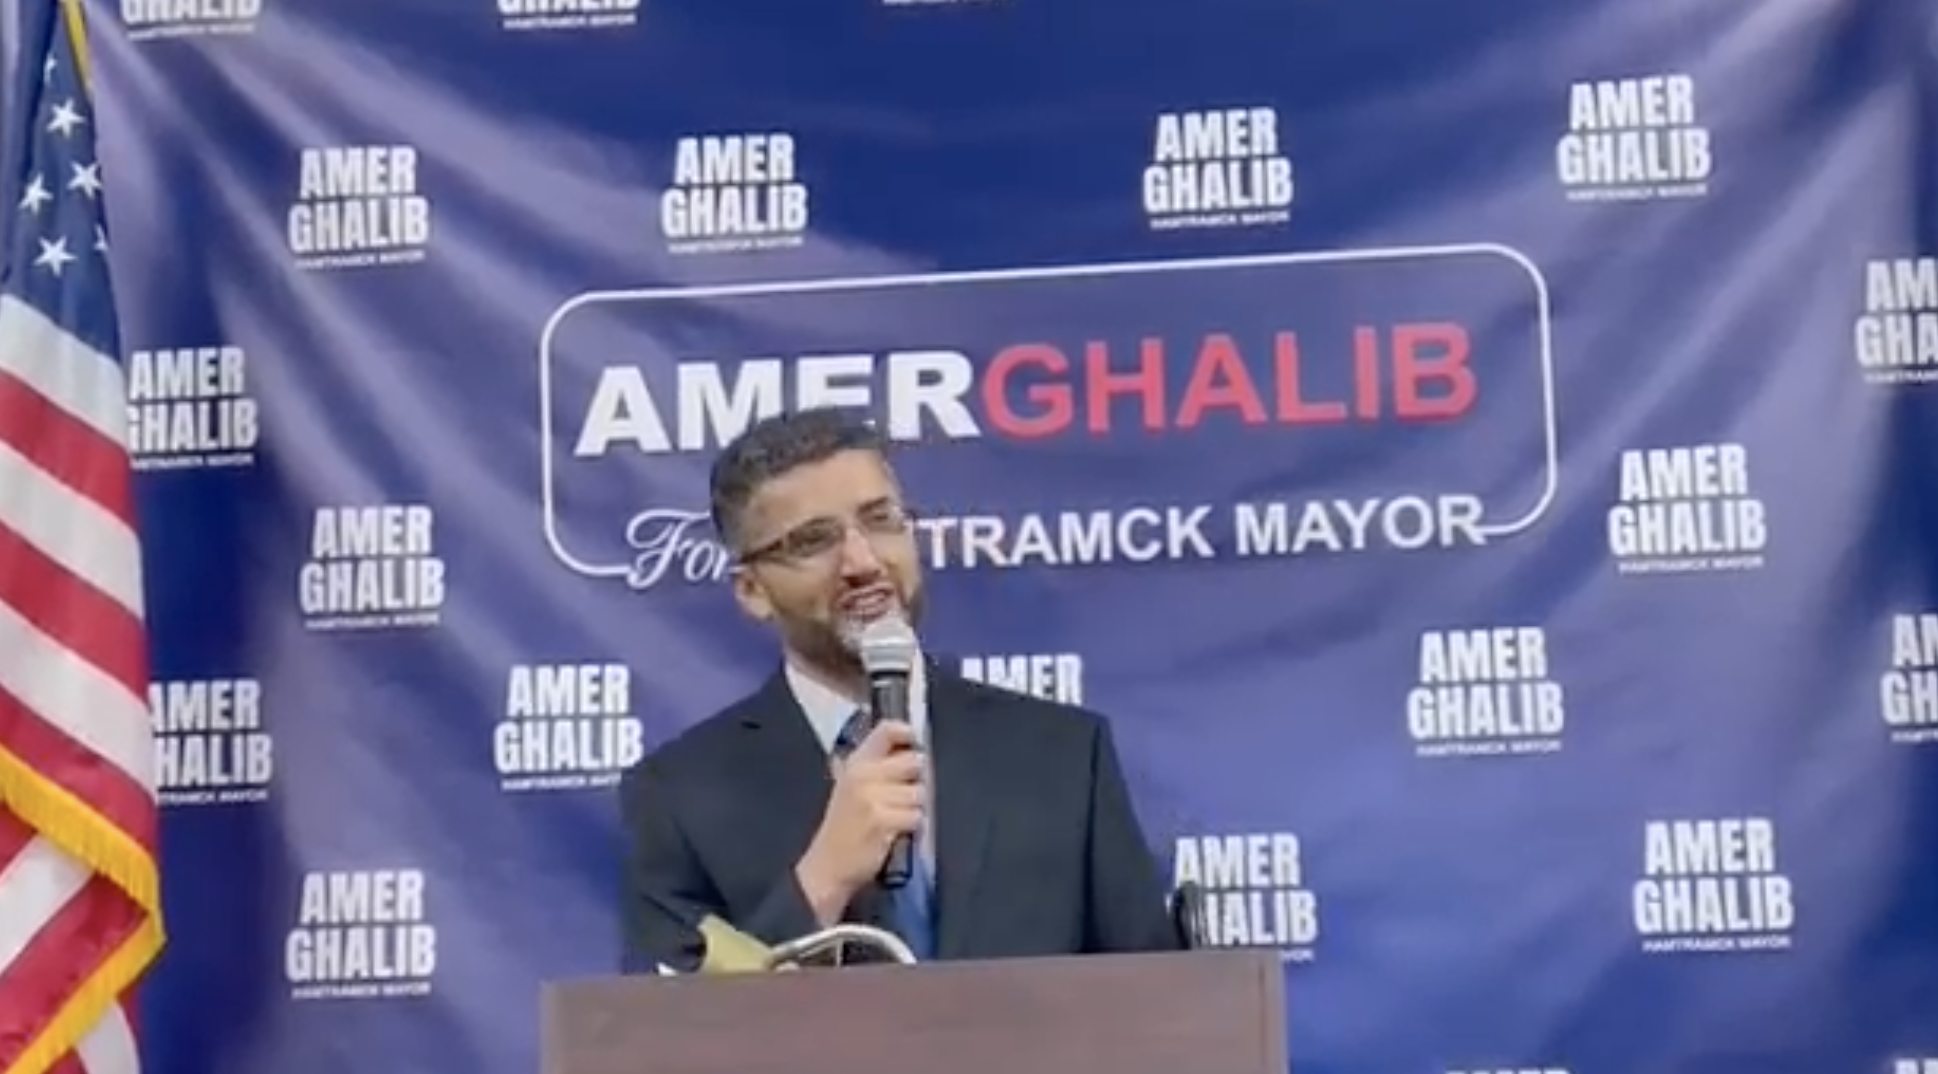 Amer Ghalib at an election victory event in Hamtramck, Tuesday, Nov. 2.